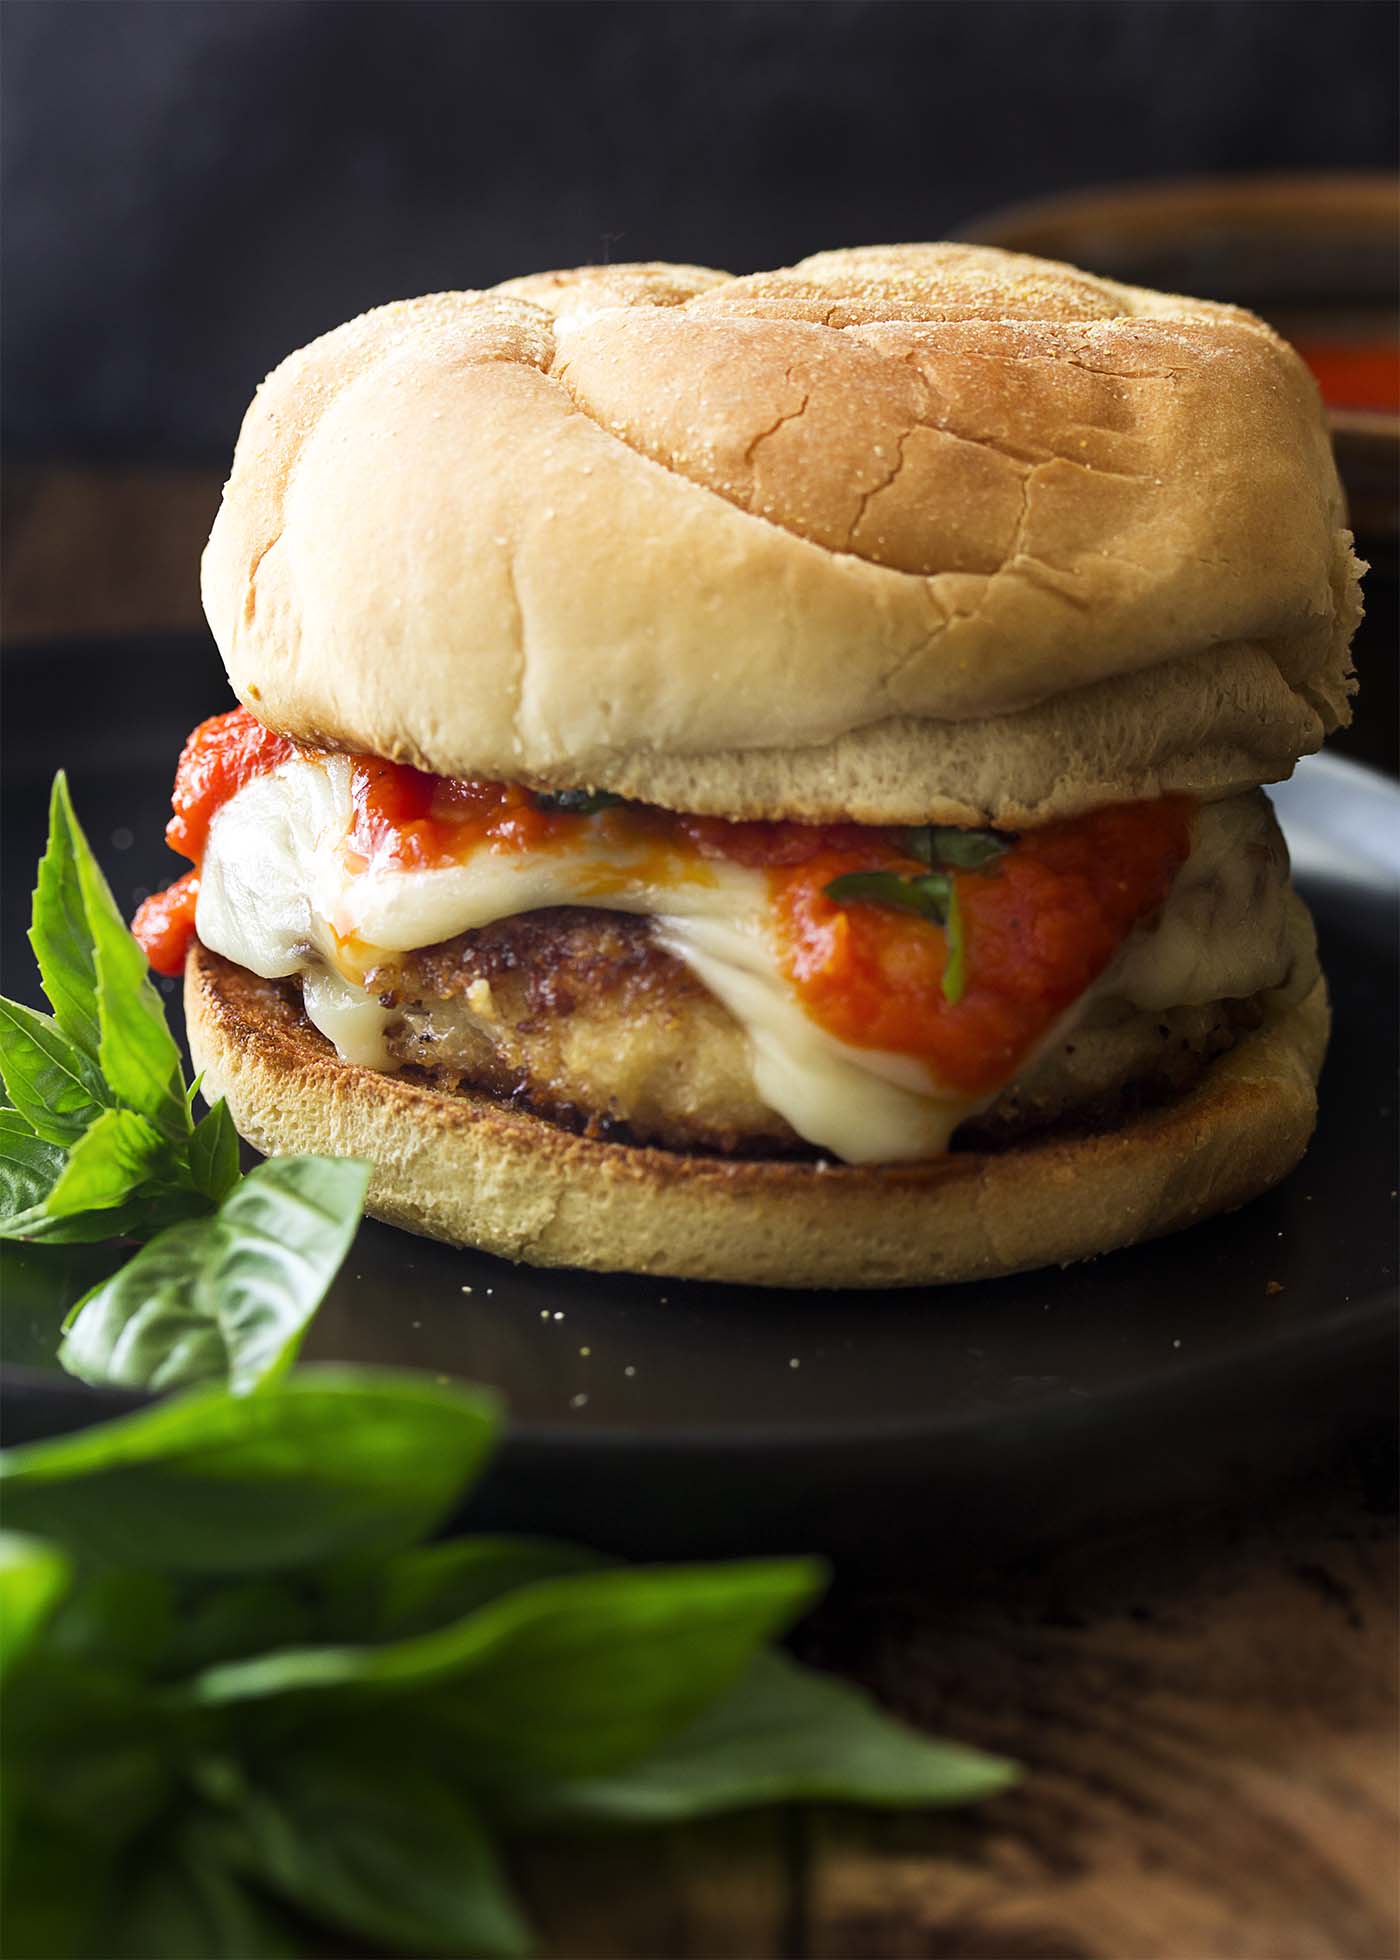 Chicken parm burger on a bun topped with melted mozzarella and tomato sauce.